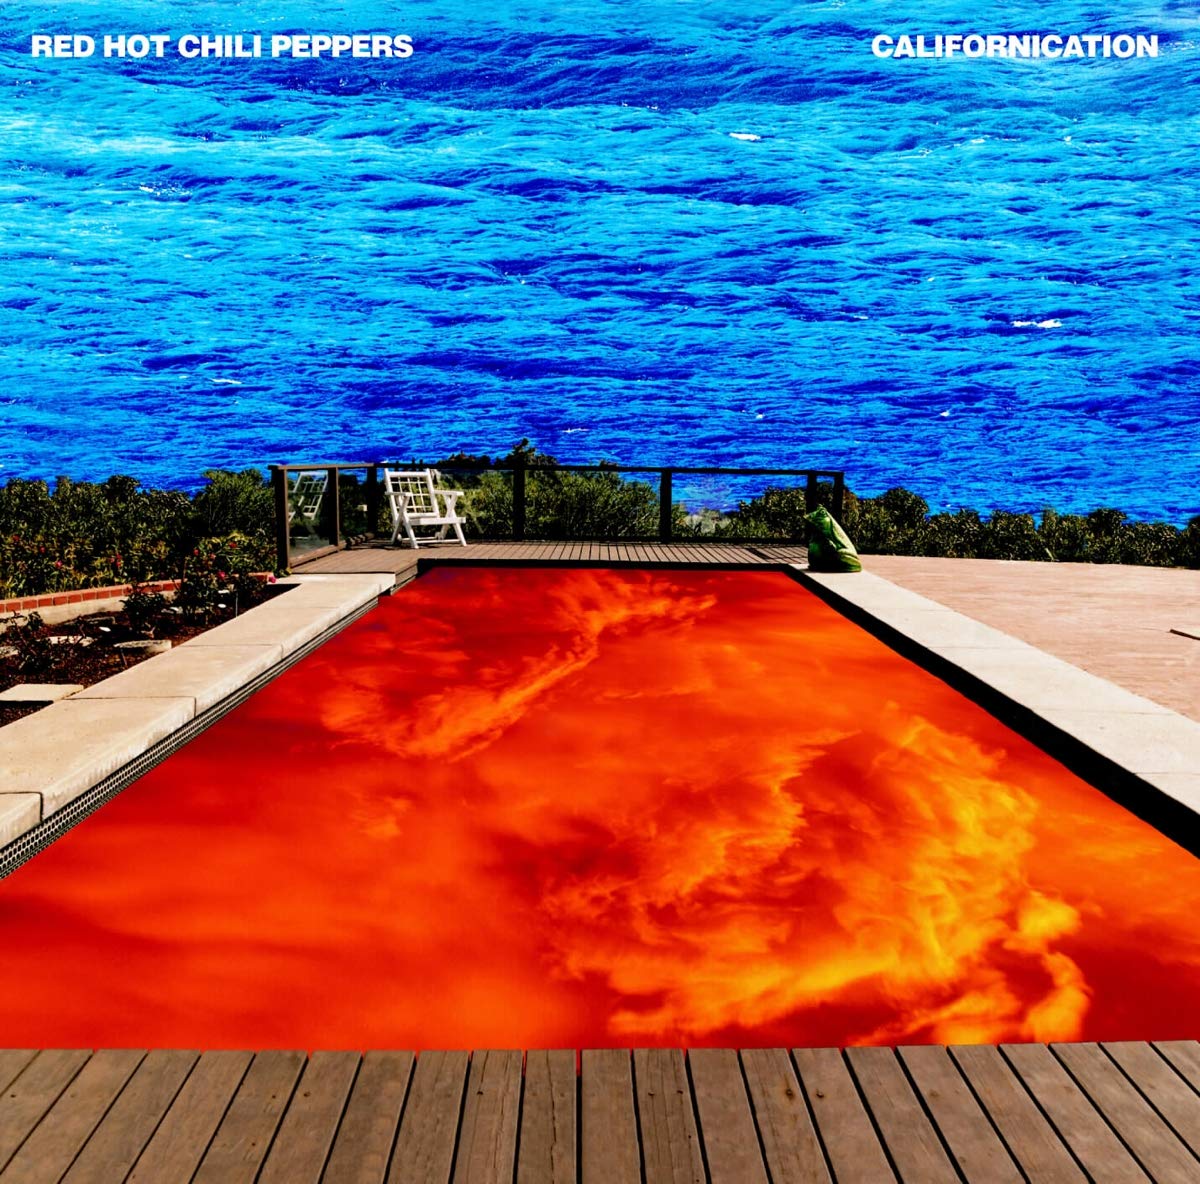 Californication: Red Hot Chilli Peppers